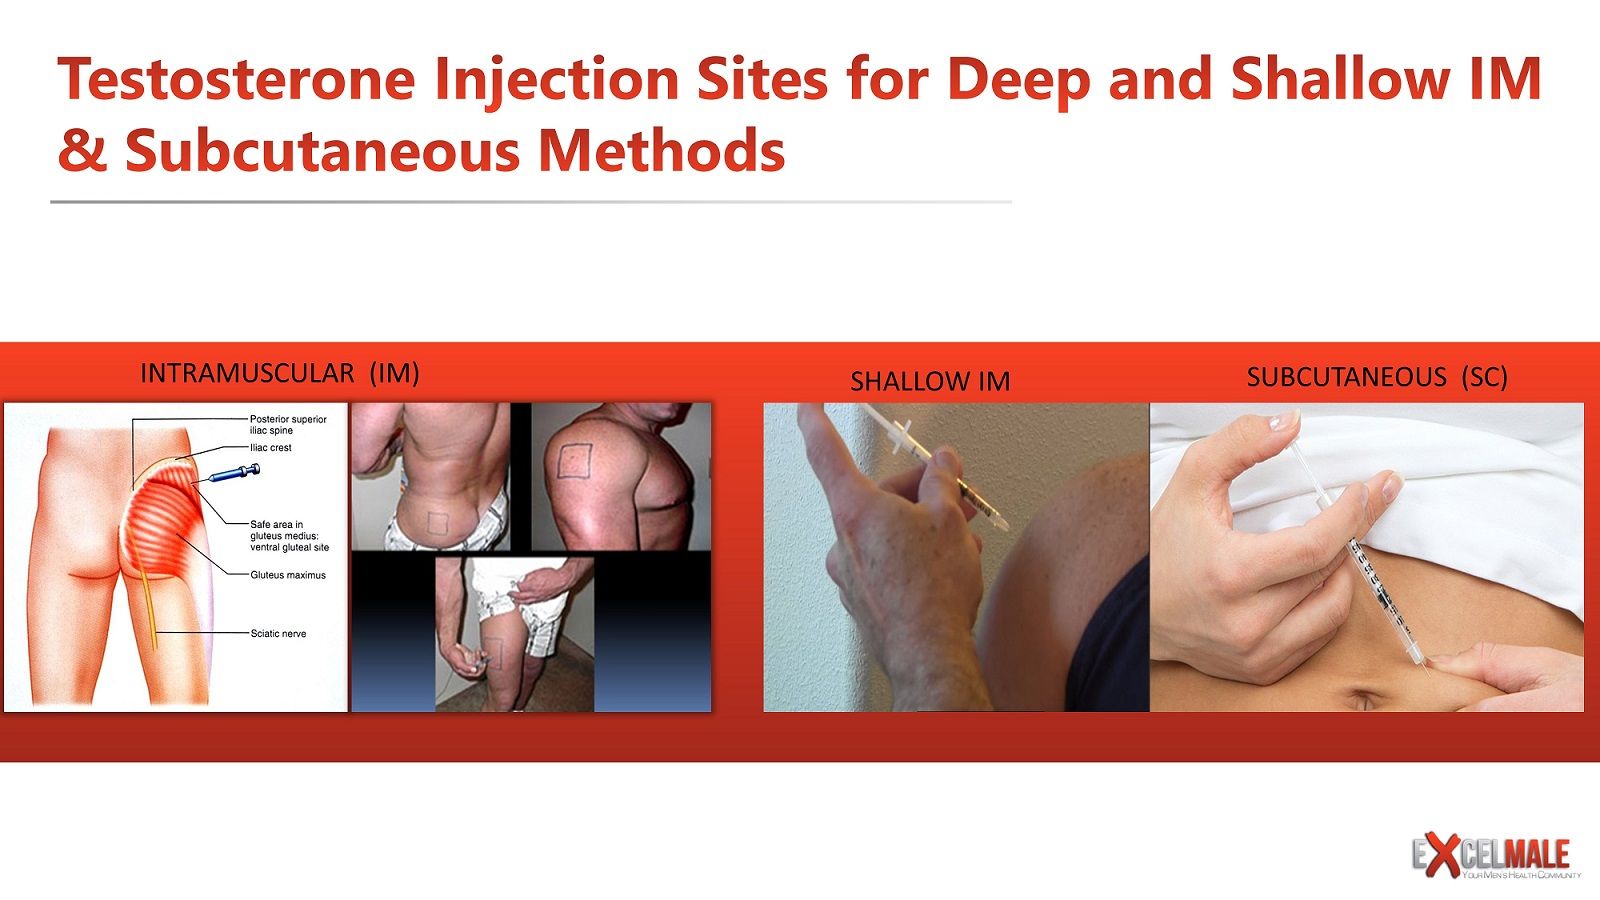 Subq Testosterone Injection Vs Intramuscular